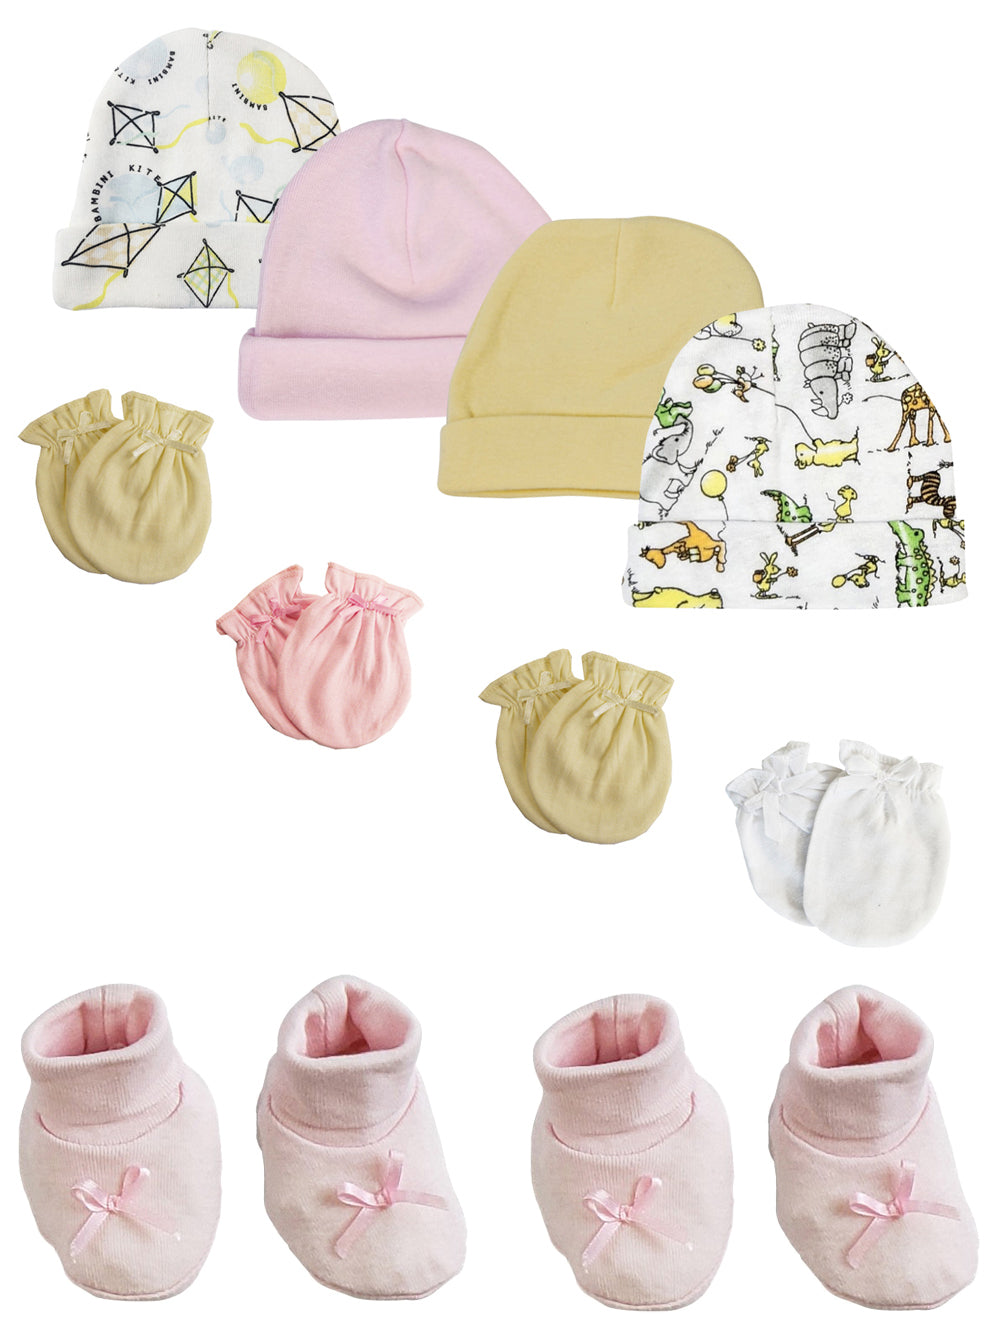 Preemie Baby Girl Caps with Infant Mittens and Booties - 10 Pack NC_0212